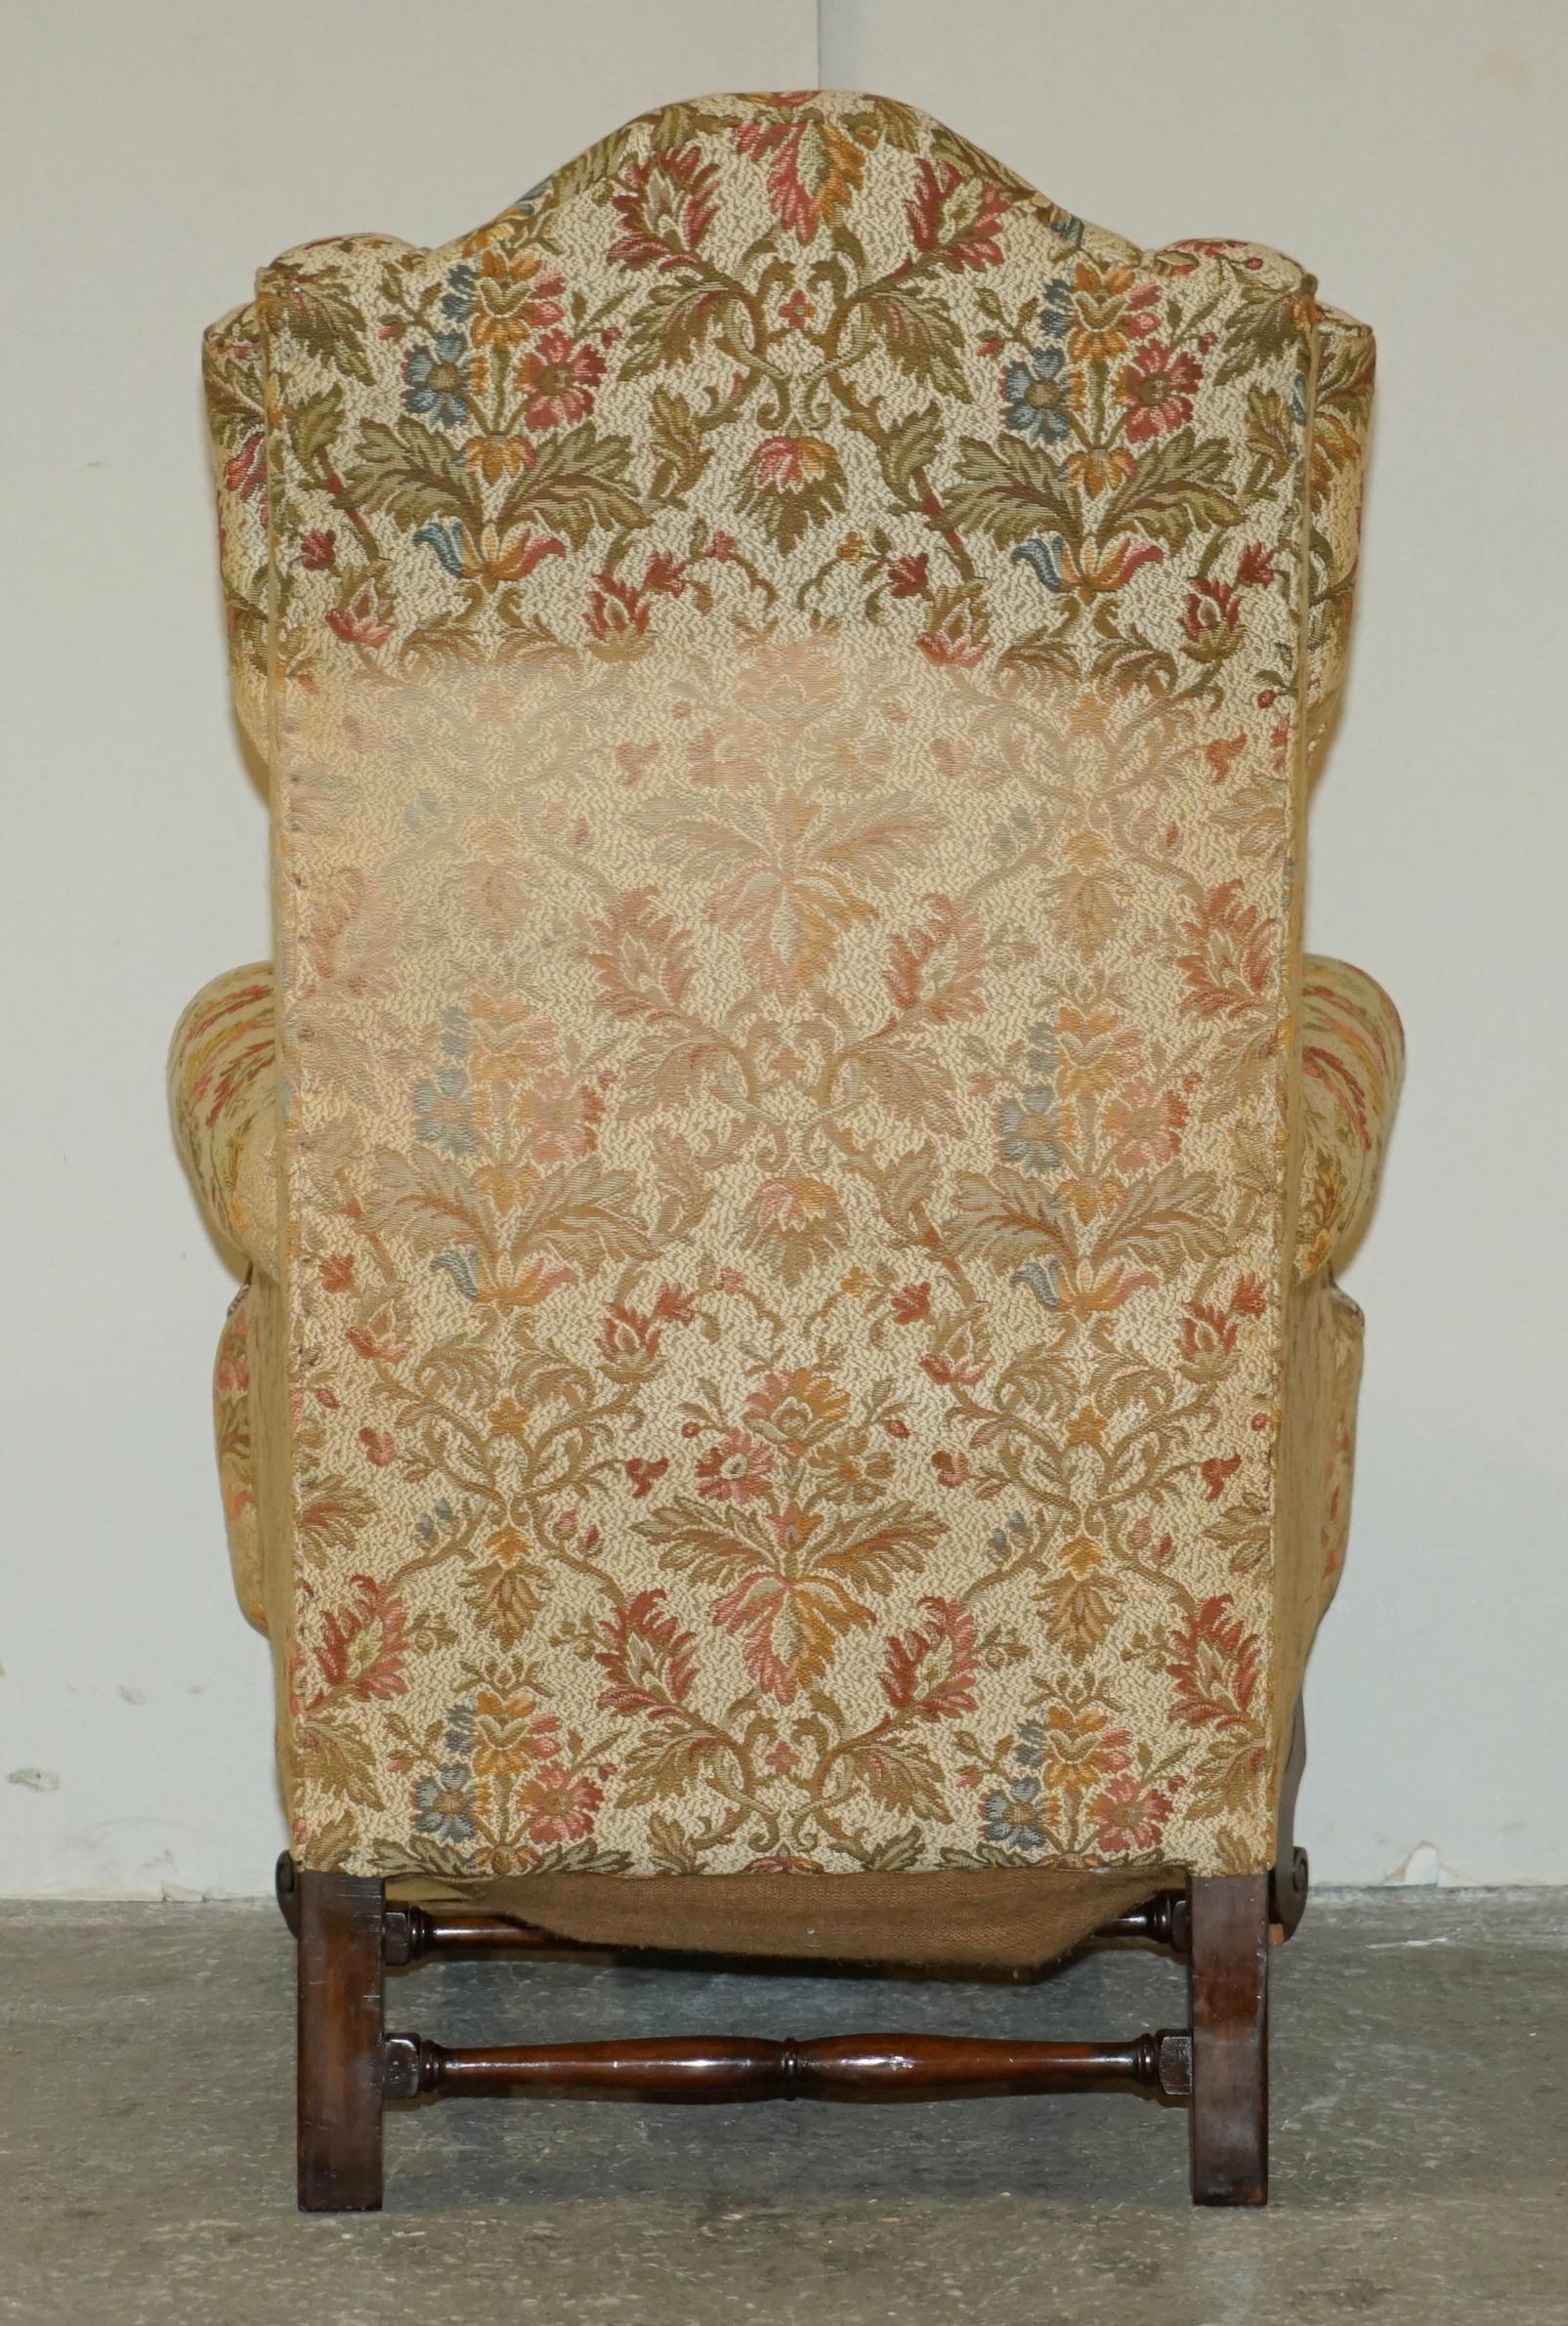 PAIR OF ANTIQUE ITALIAN CAROLEAN HIGH BACK WiNGBACK ARMCHAIRS FOR UPHOLSTERY For Sale 12